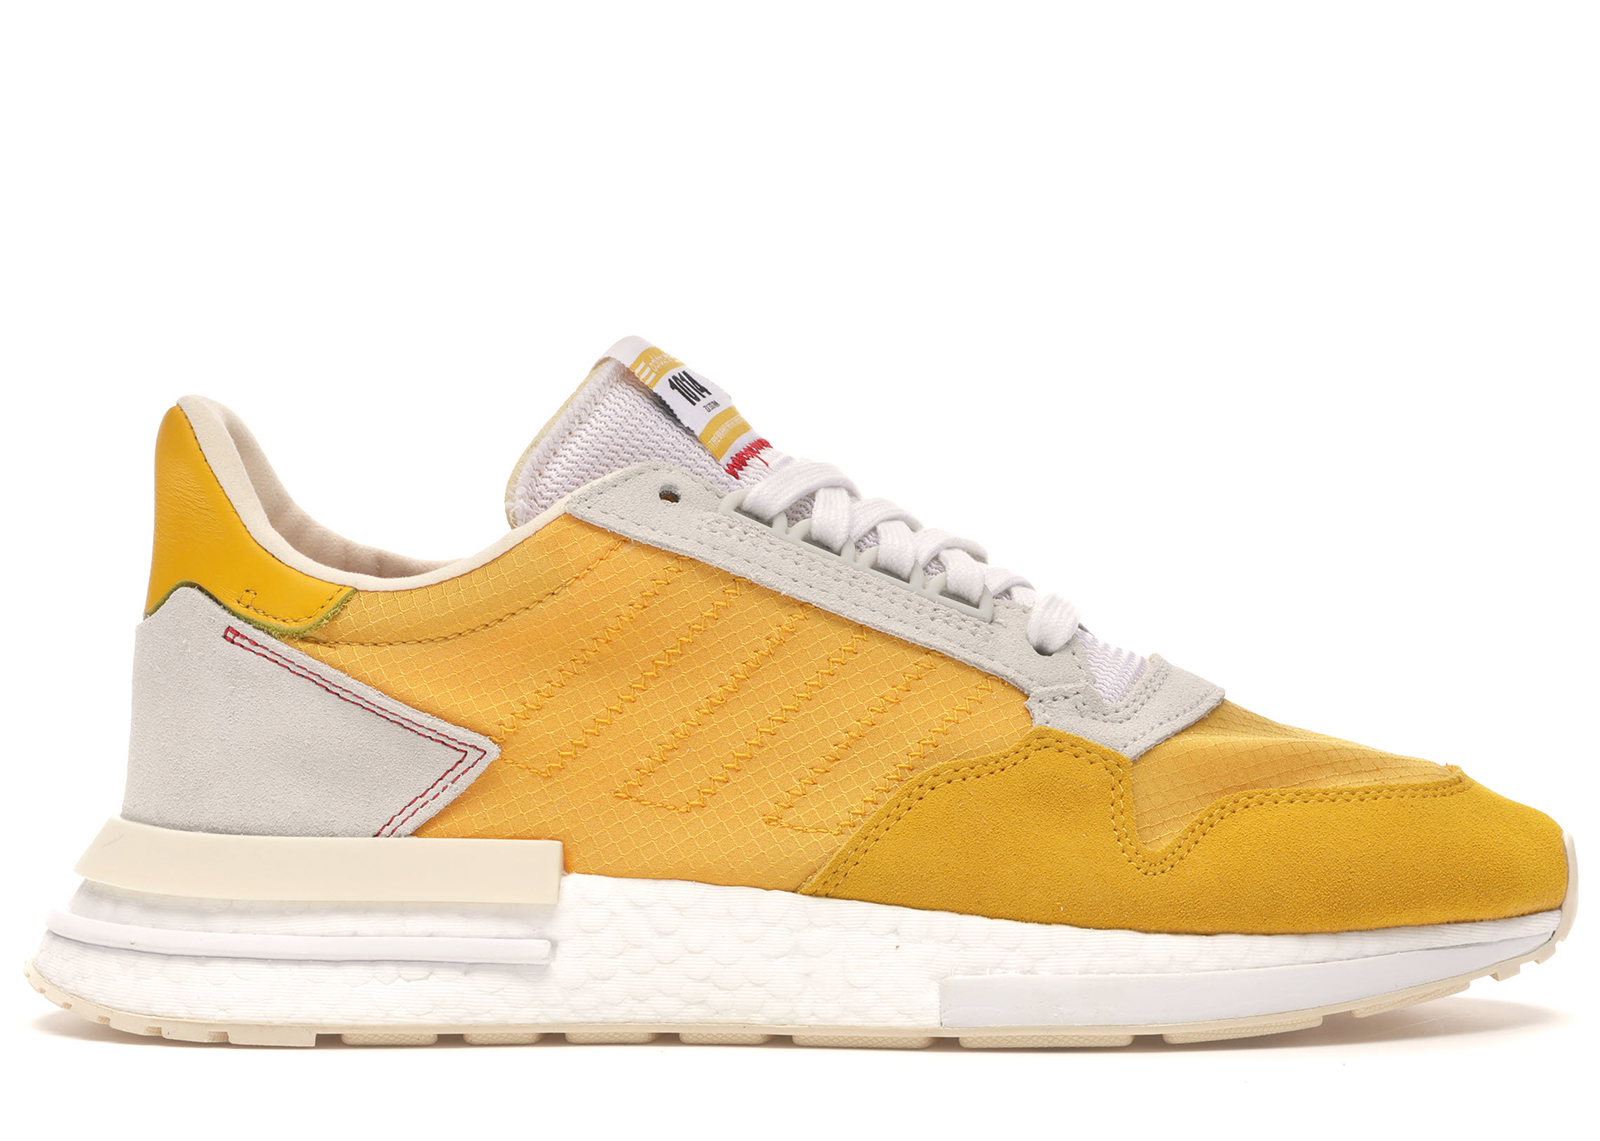 adidas zx 500 red yellow